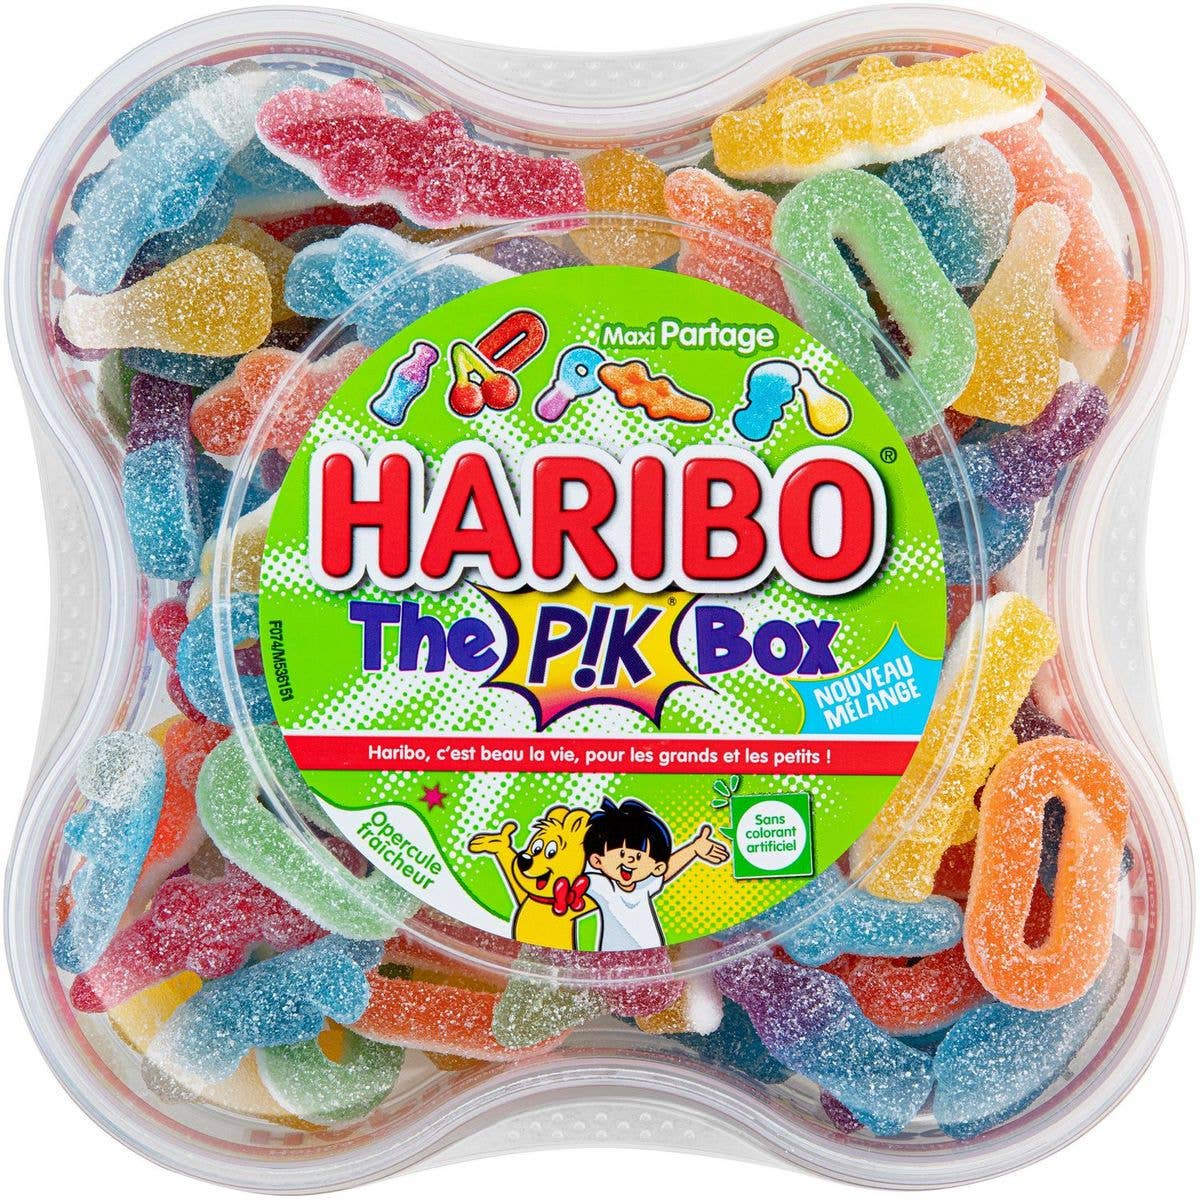 Purchase Wholesale haribo candy. Free Returns & Net 60 Terms on Faire